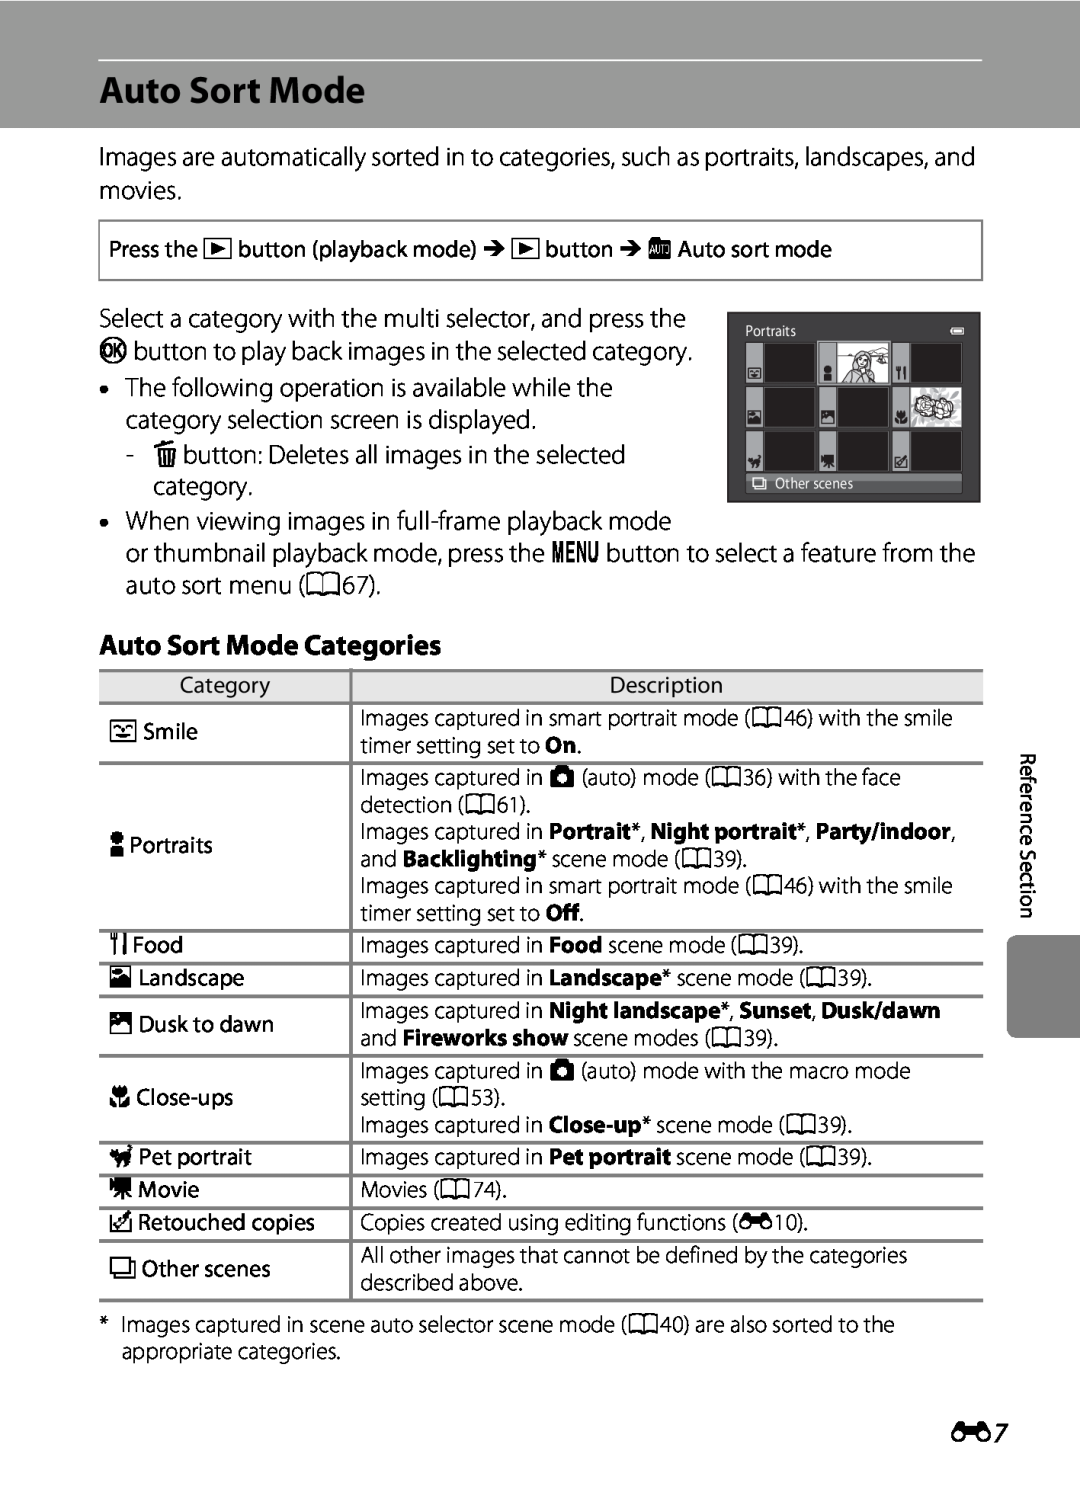 Nikon S2600 manual Auto Sort Mode Categories, kbutton to play back images in the selected category 